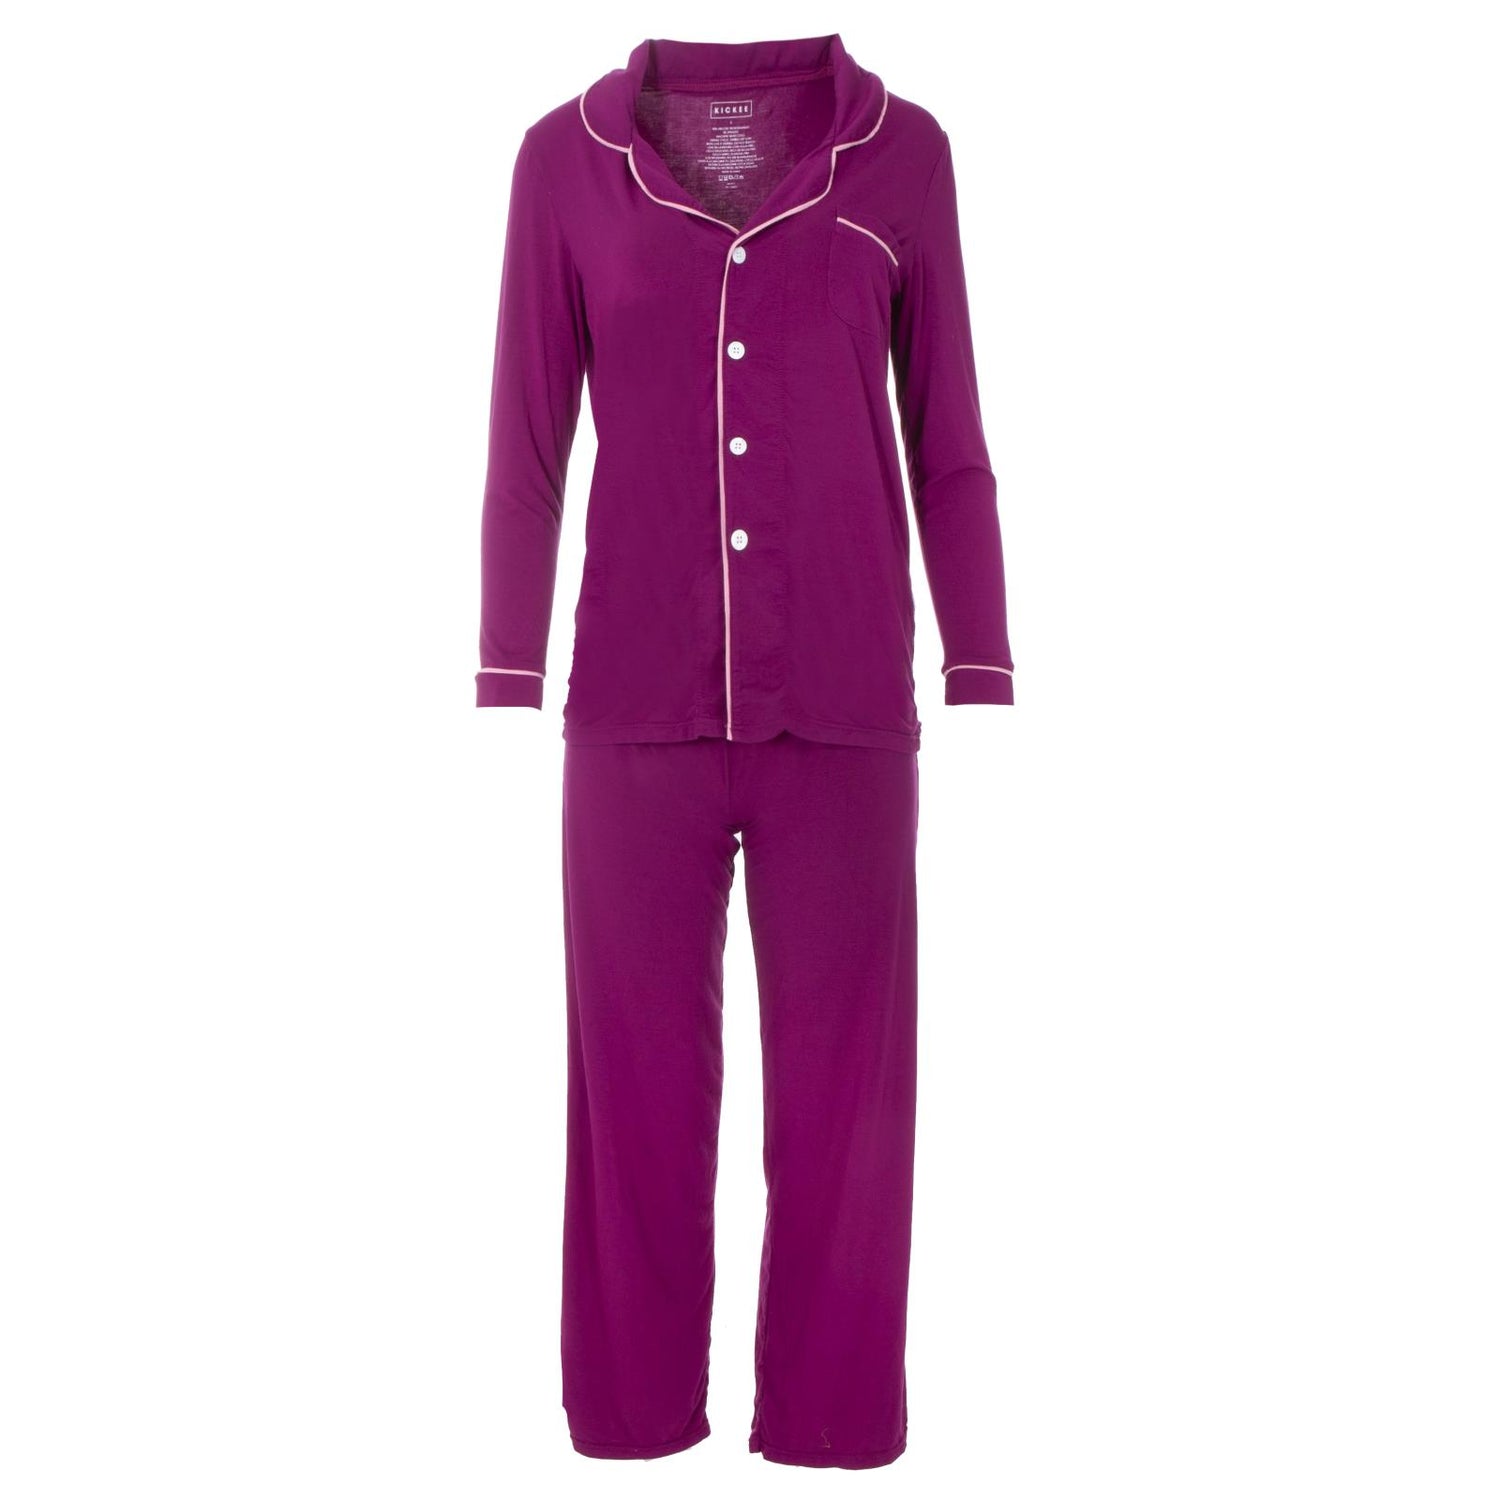 Women's Collared Pajama Set in Orchid with Lotus